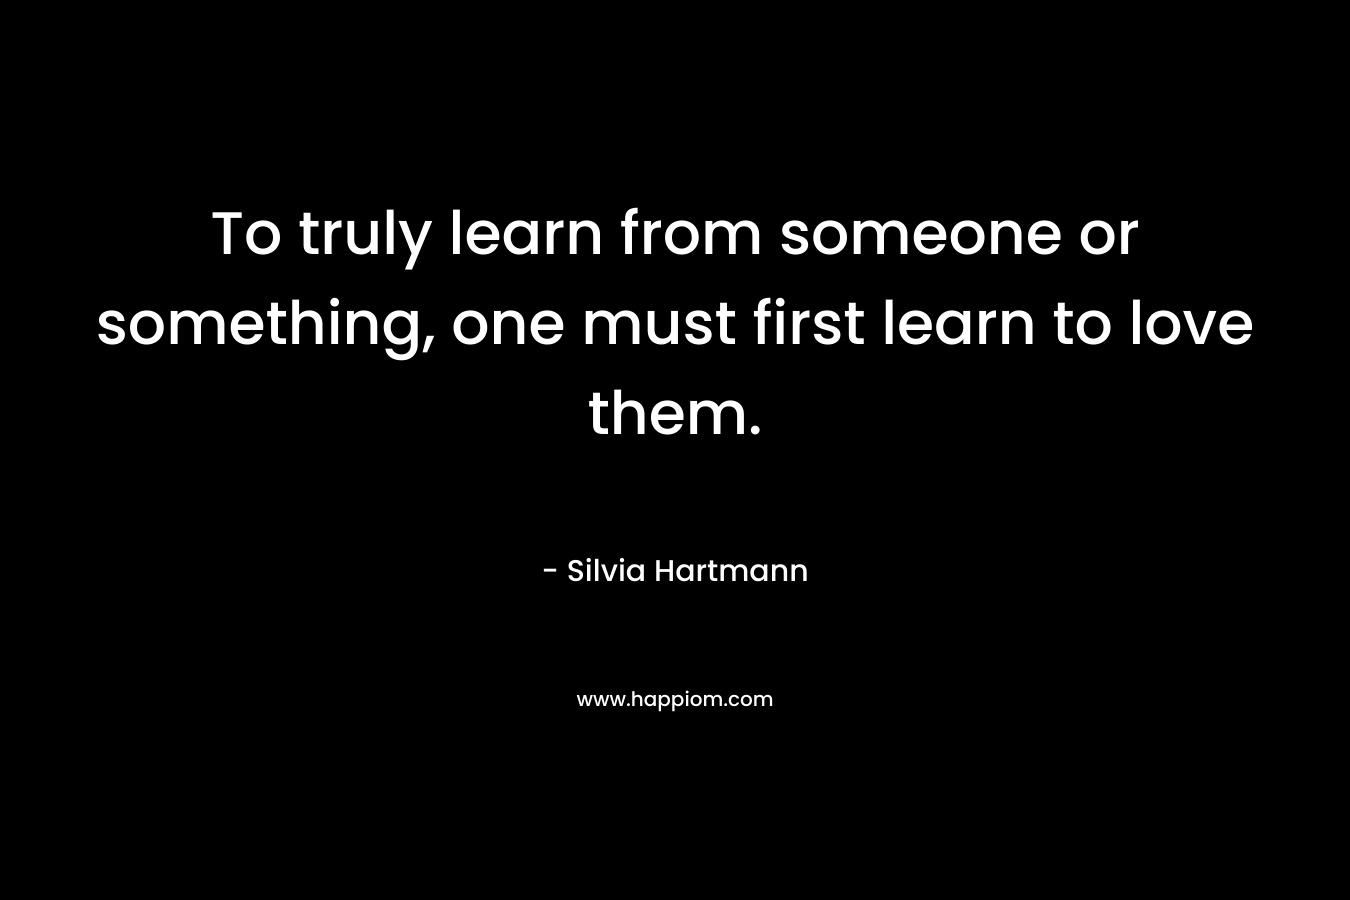 To truly learn from someone or something, one must first learn to love them.